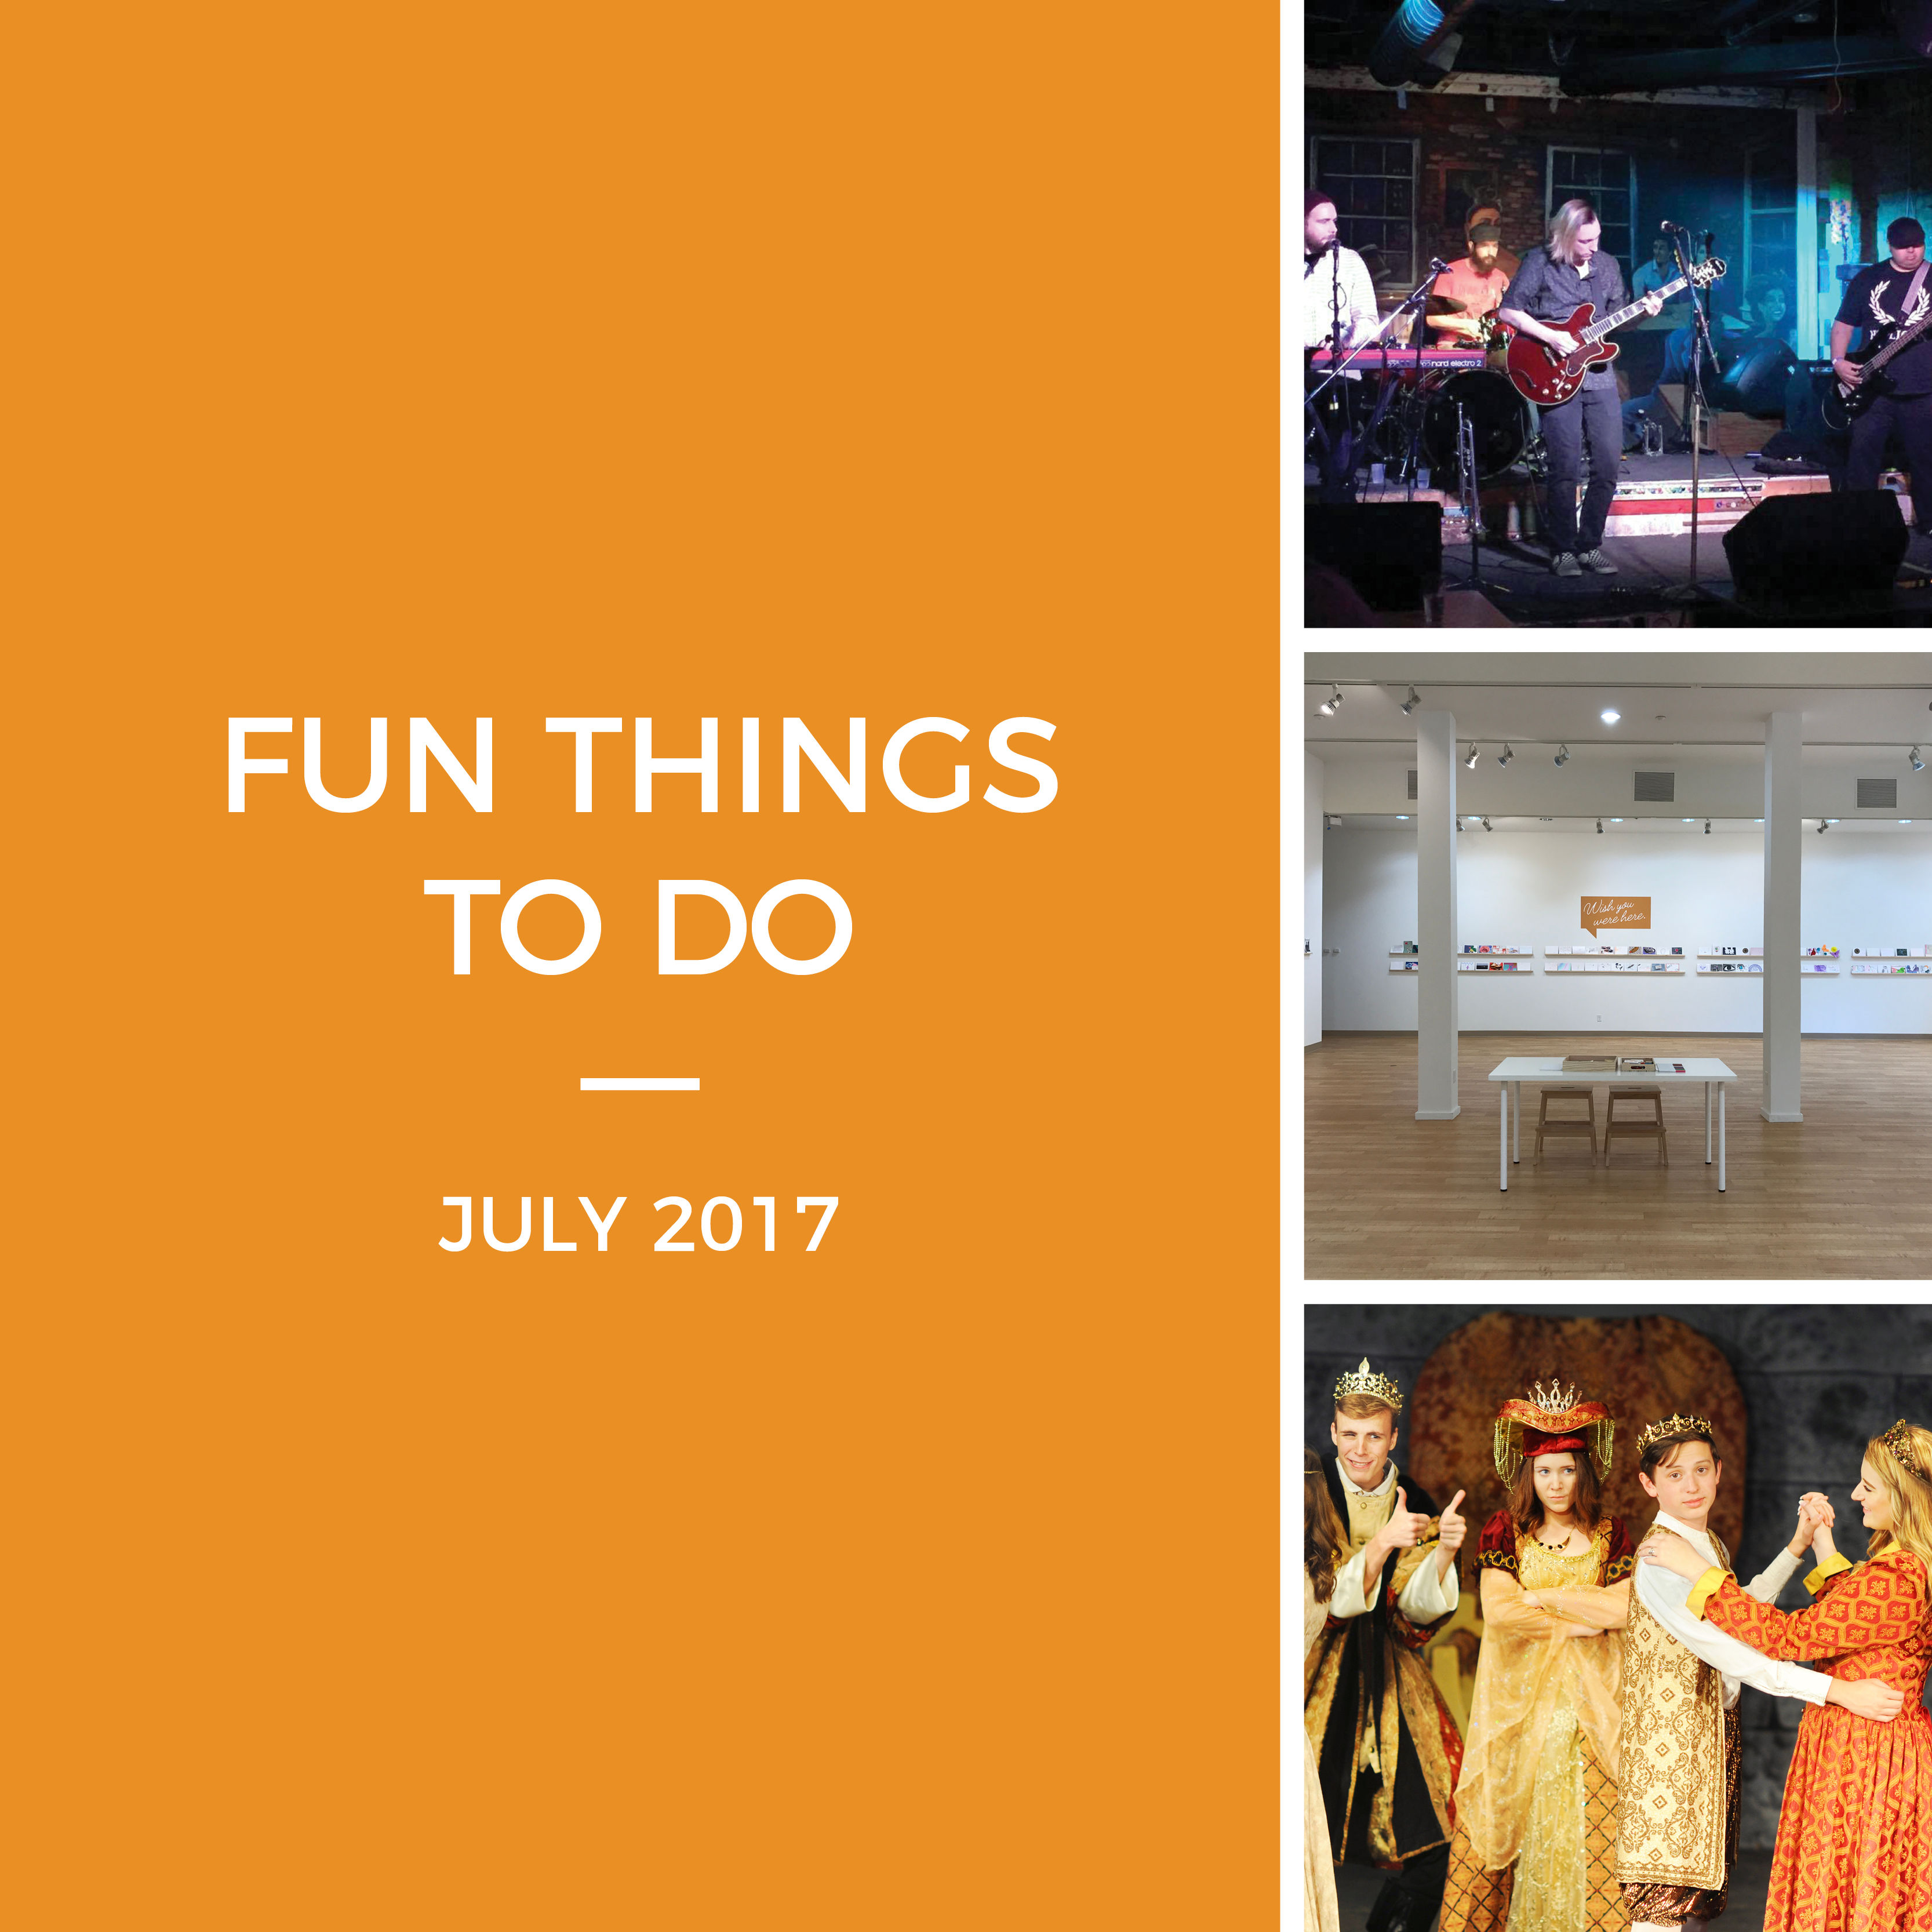 Fun Things to Do in July!